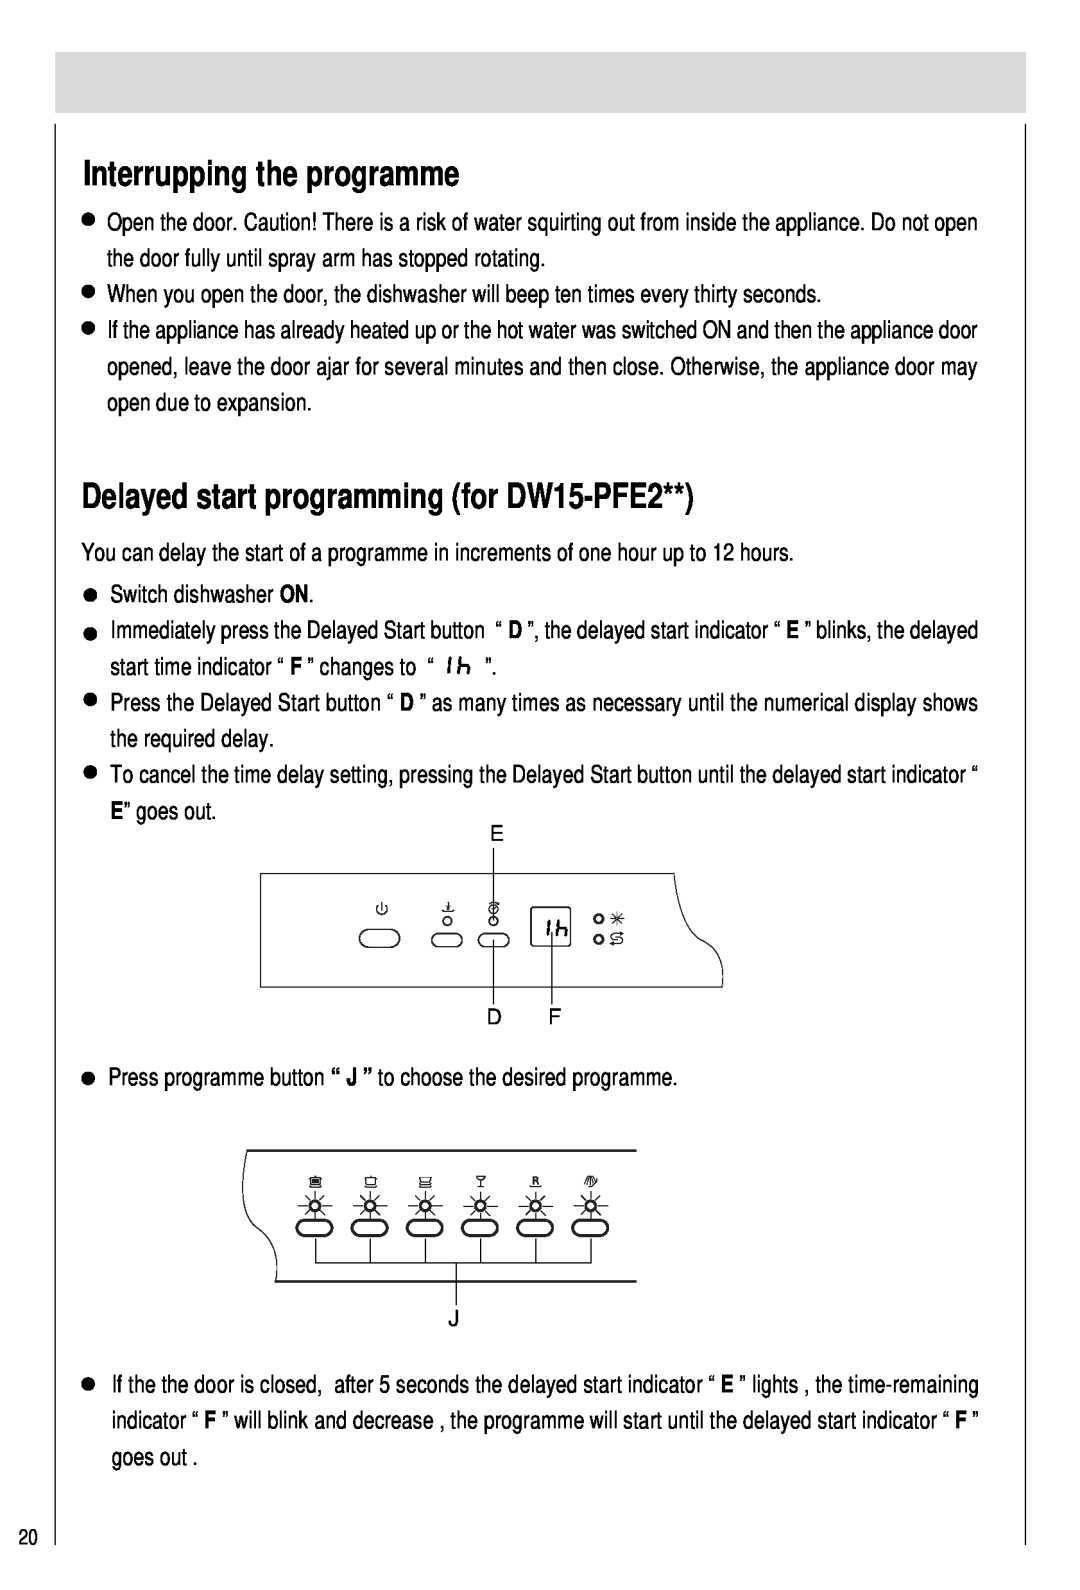 Haier DW15-PFE1 manual Interrupping the programme, Delayed start programming for DW15-PFE2 